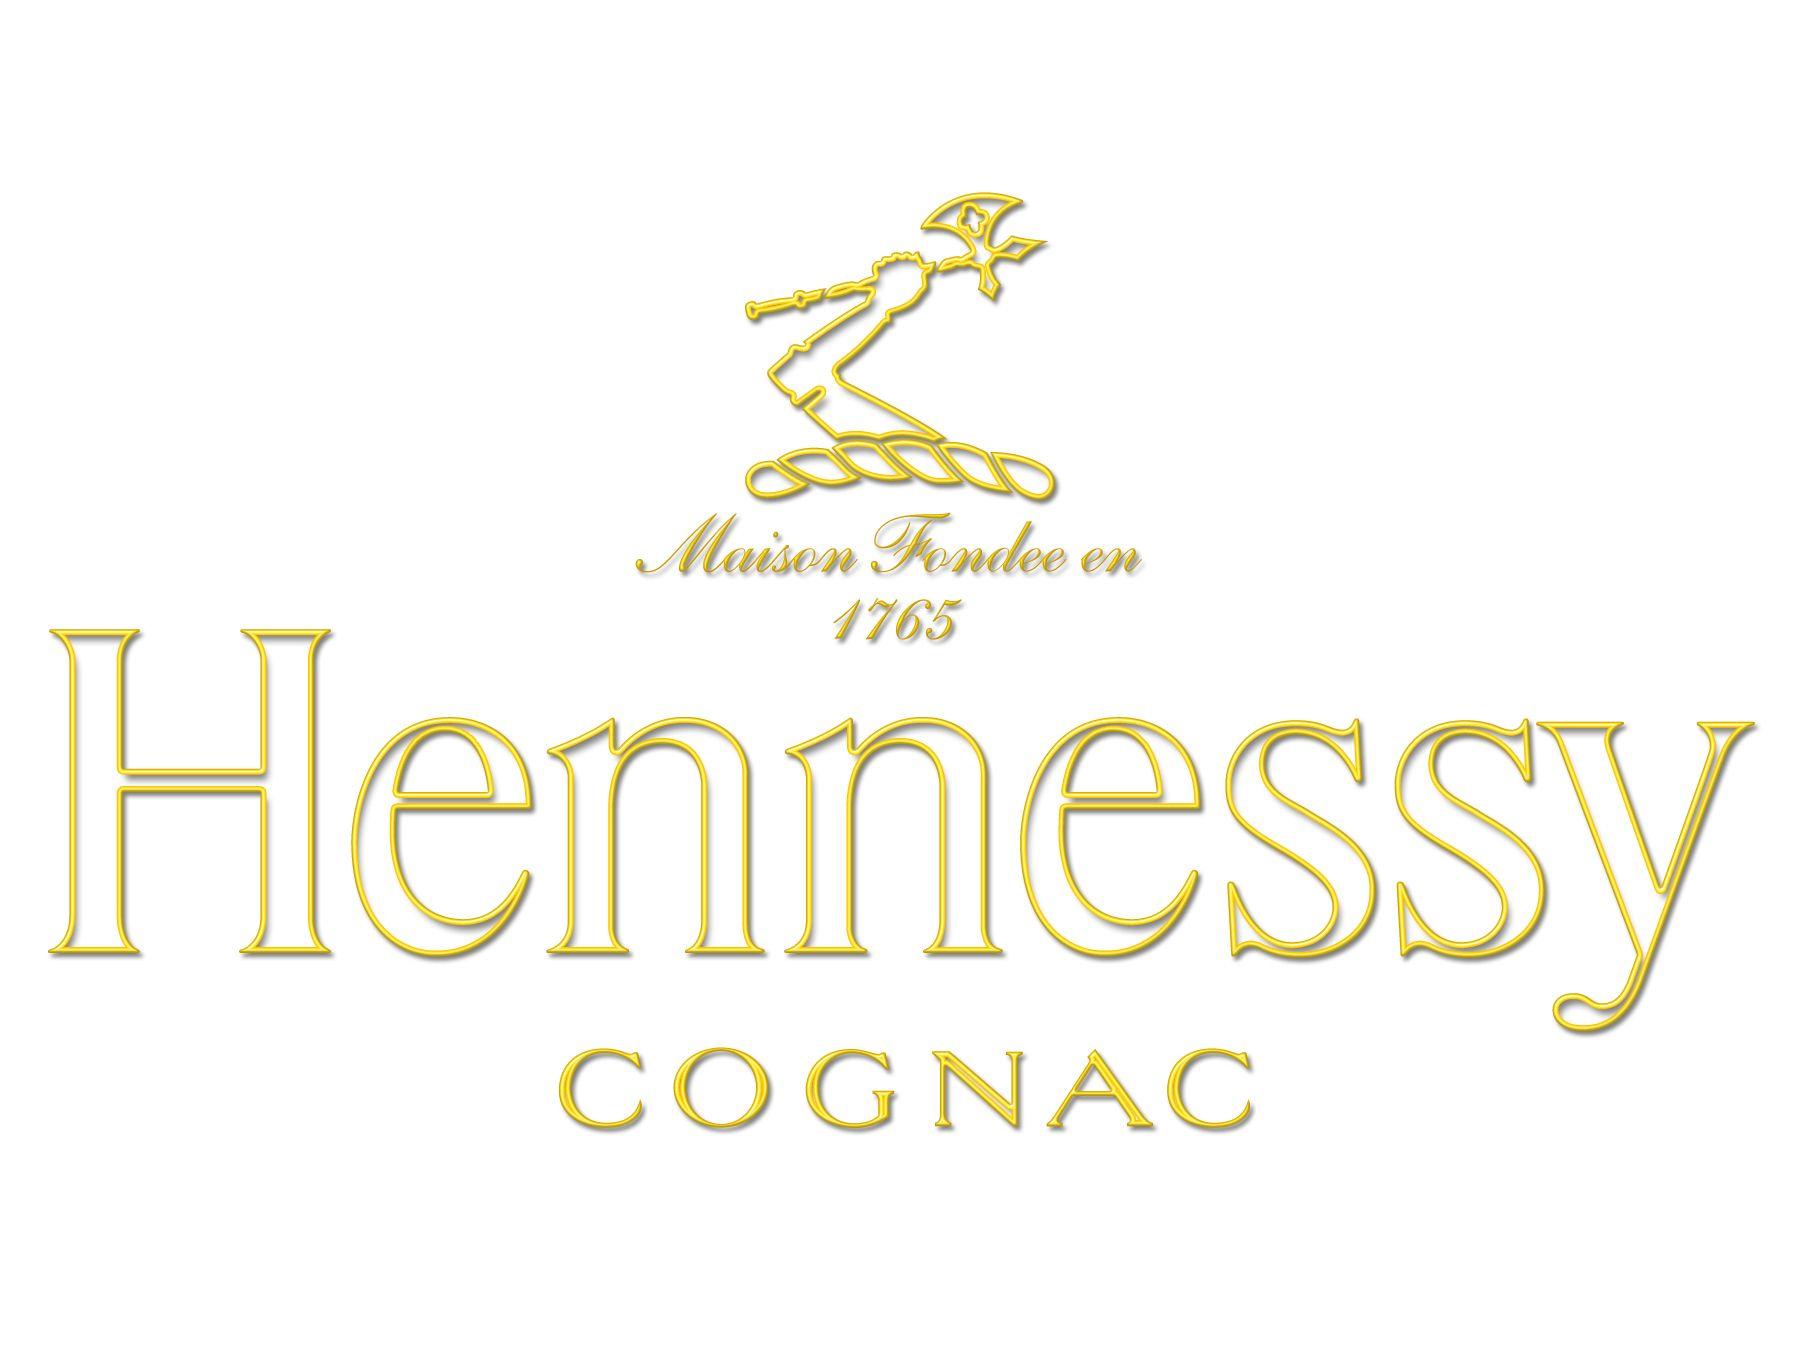 Hennessy Cognac Logo - Hennessy Logo, Hennessy Symbol, Meaning, History and Evolution